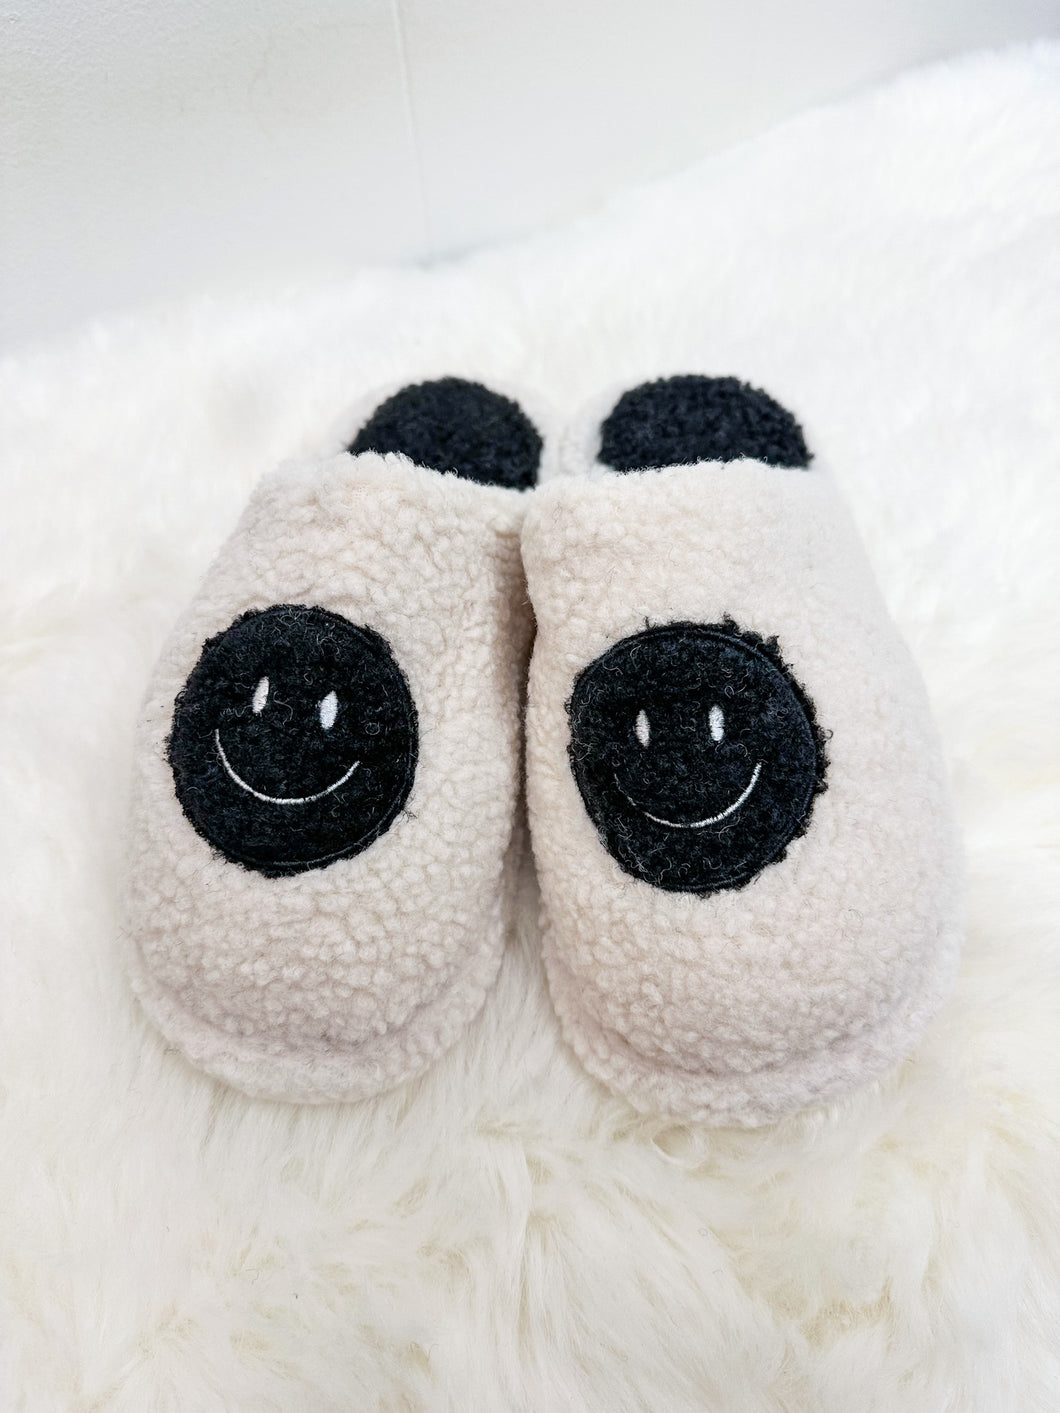 A Great Pair Smiley Face Slippers